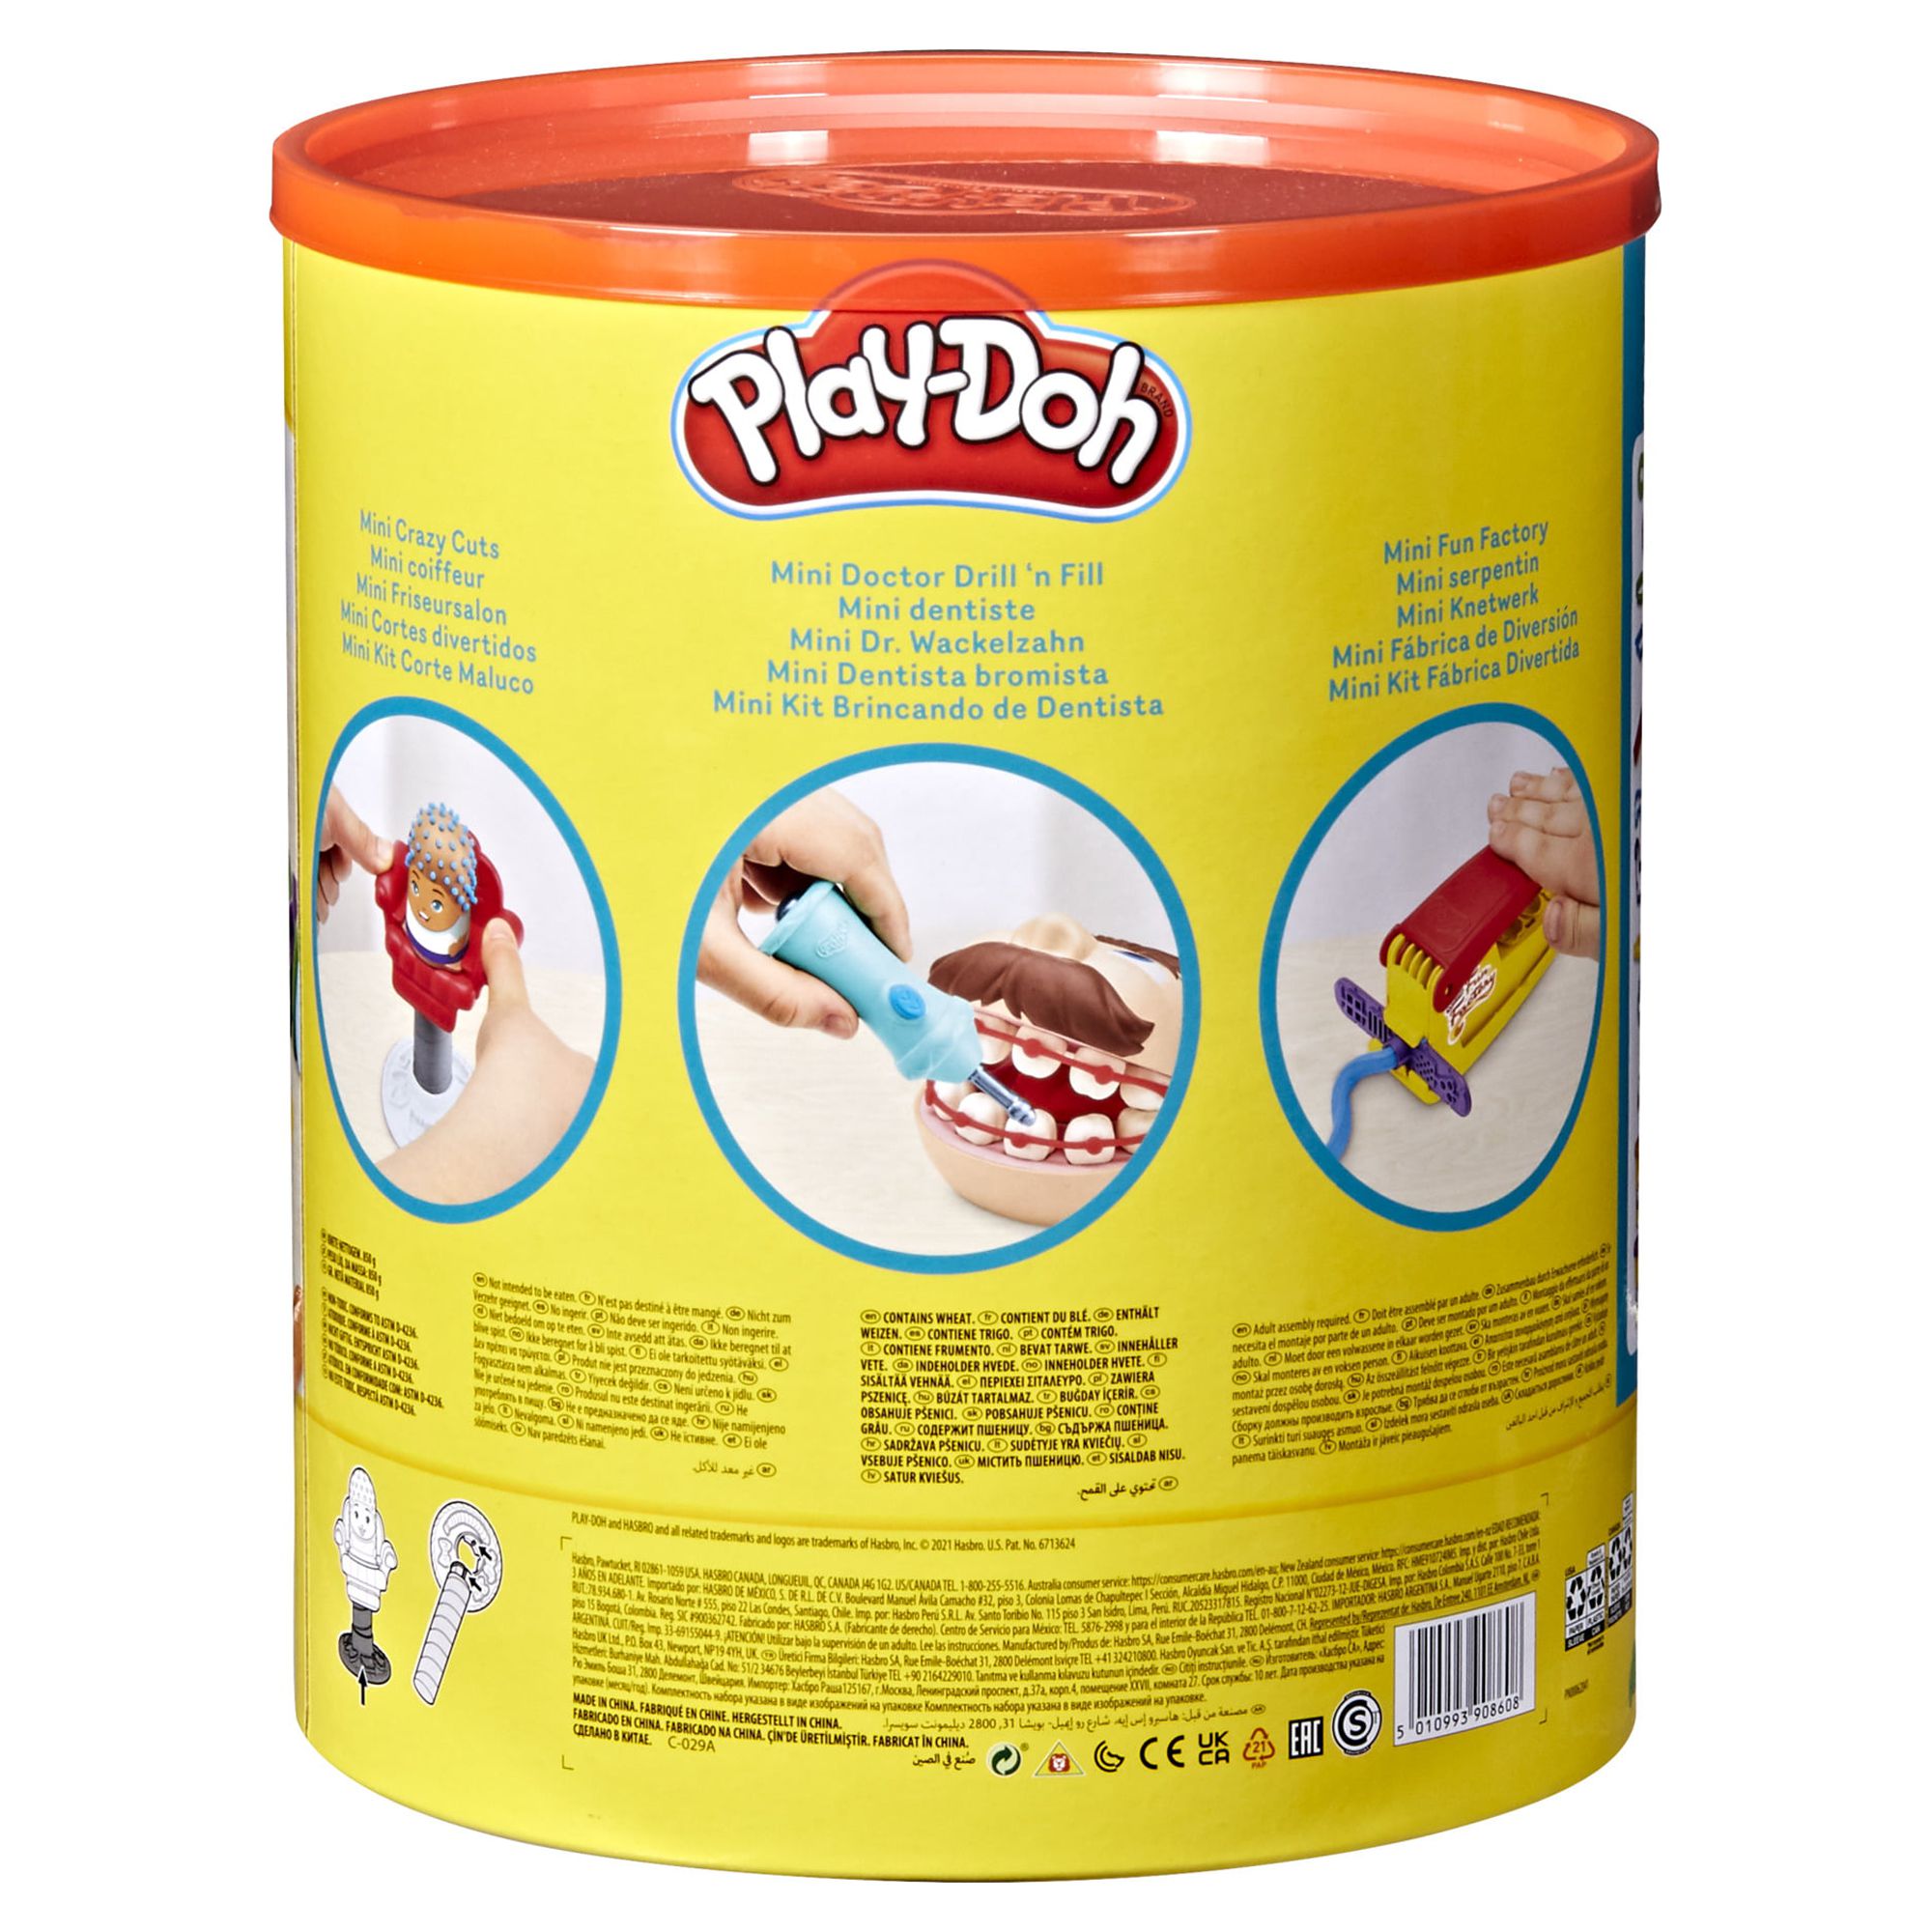 Play-Doh Big Time Classics Canister Bundle of 3 Playsets, 30 Ounces Modeling Compound - image 3 of 11